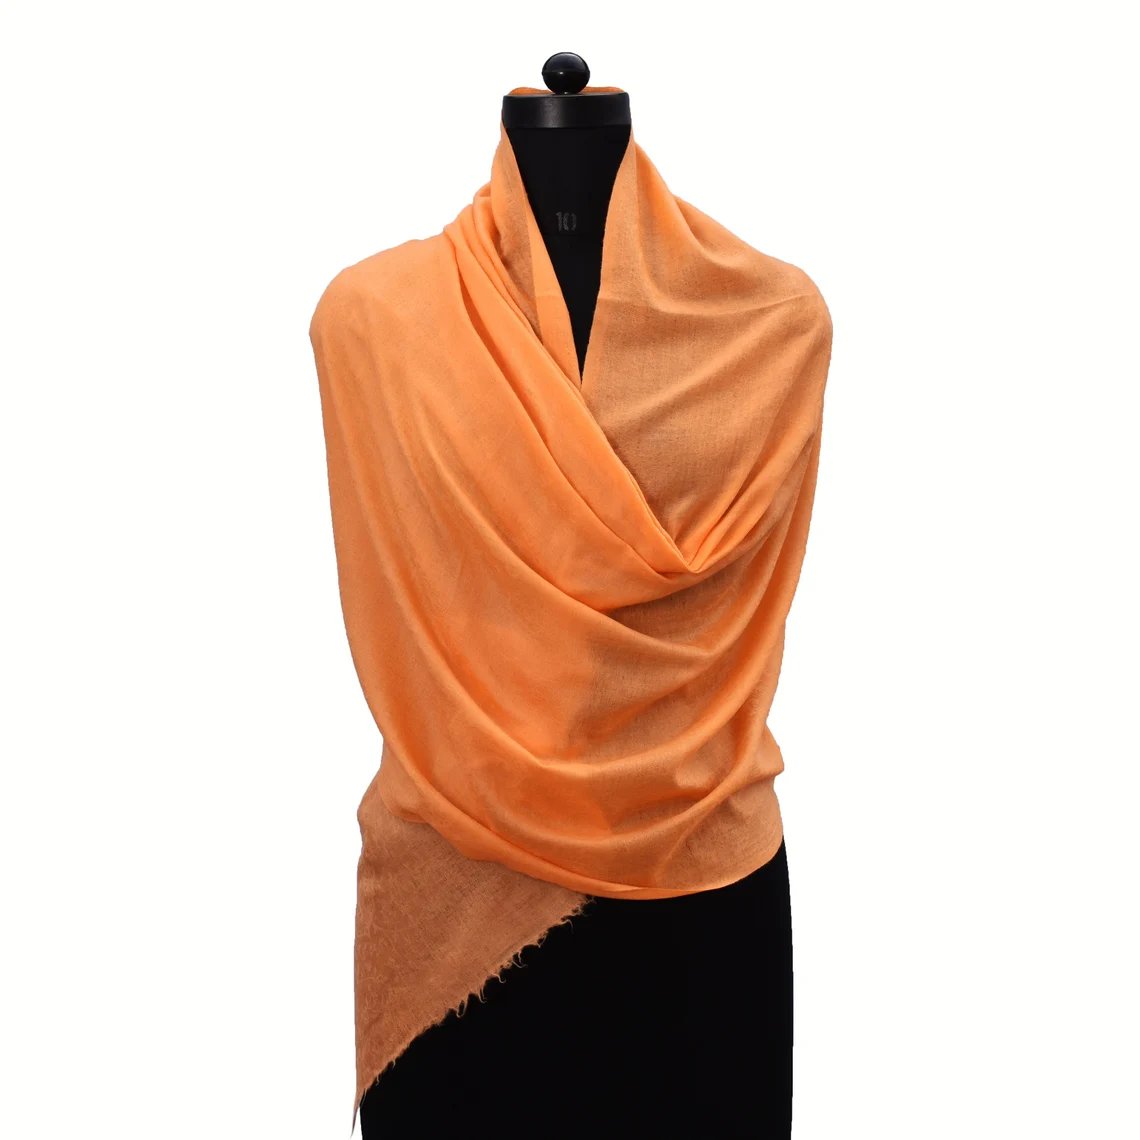 Wool Pashmina Scarves and Shawls